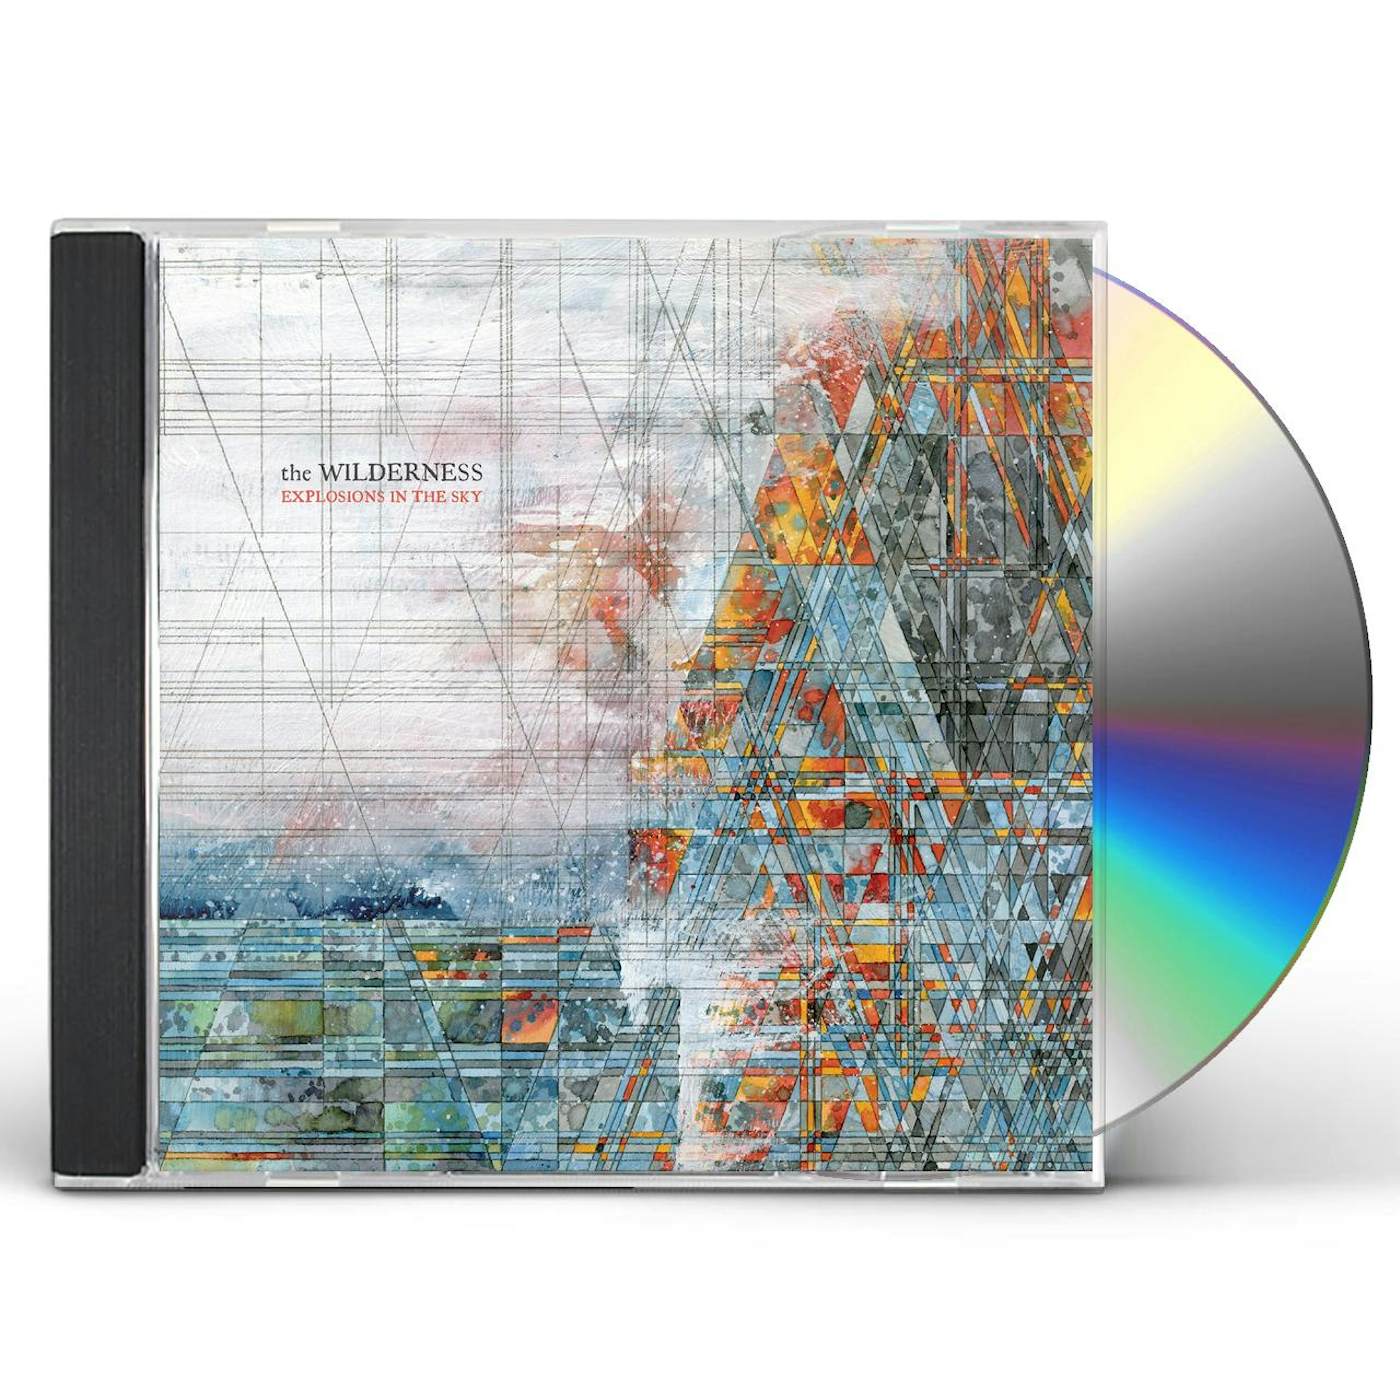 Explosions In The Sky WILDERNESS CD